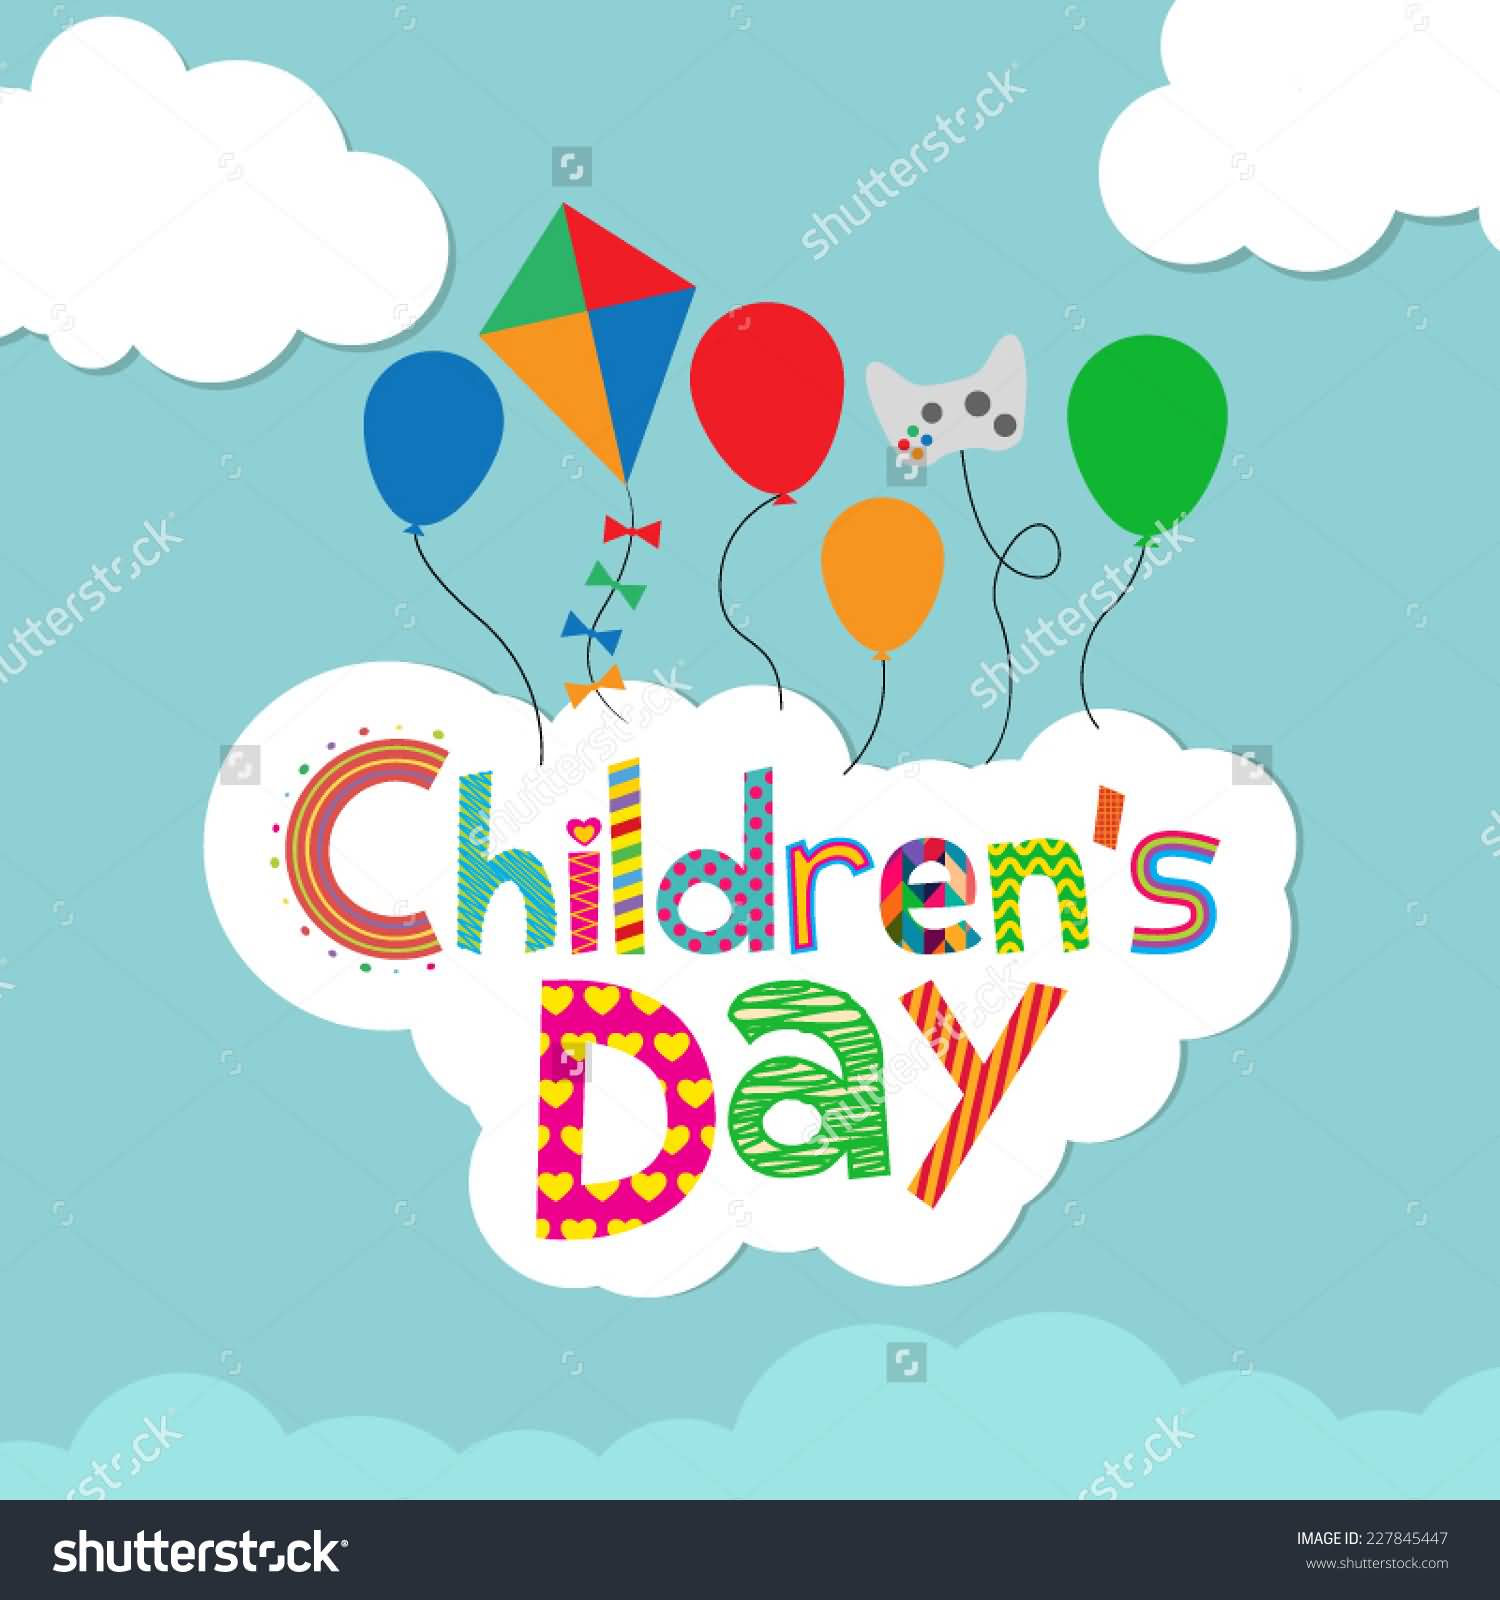 Children's Day Colorful Text On Clouds With Balloons, Kite And Game Clipart